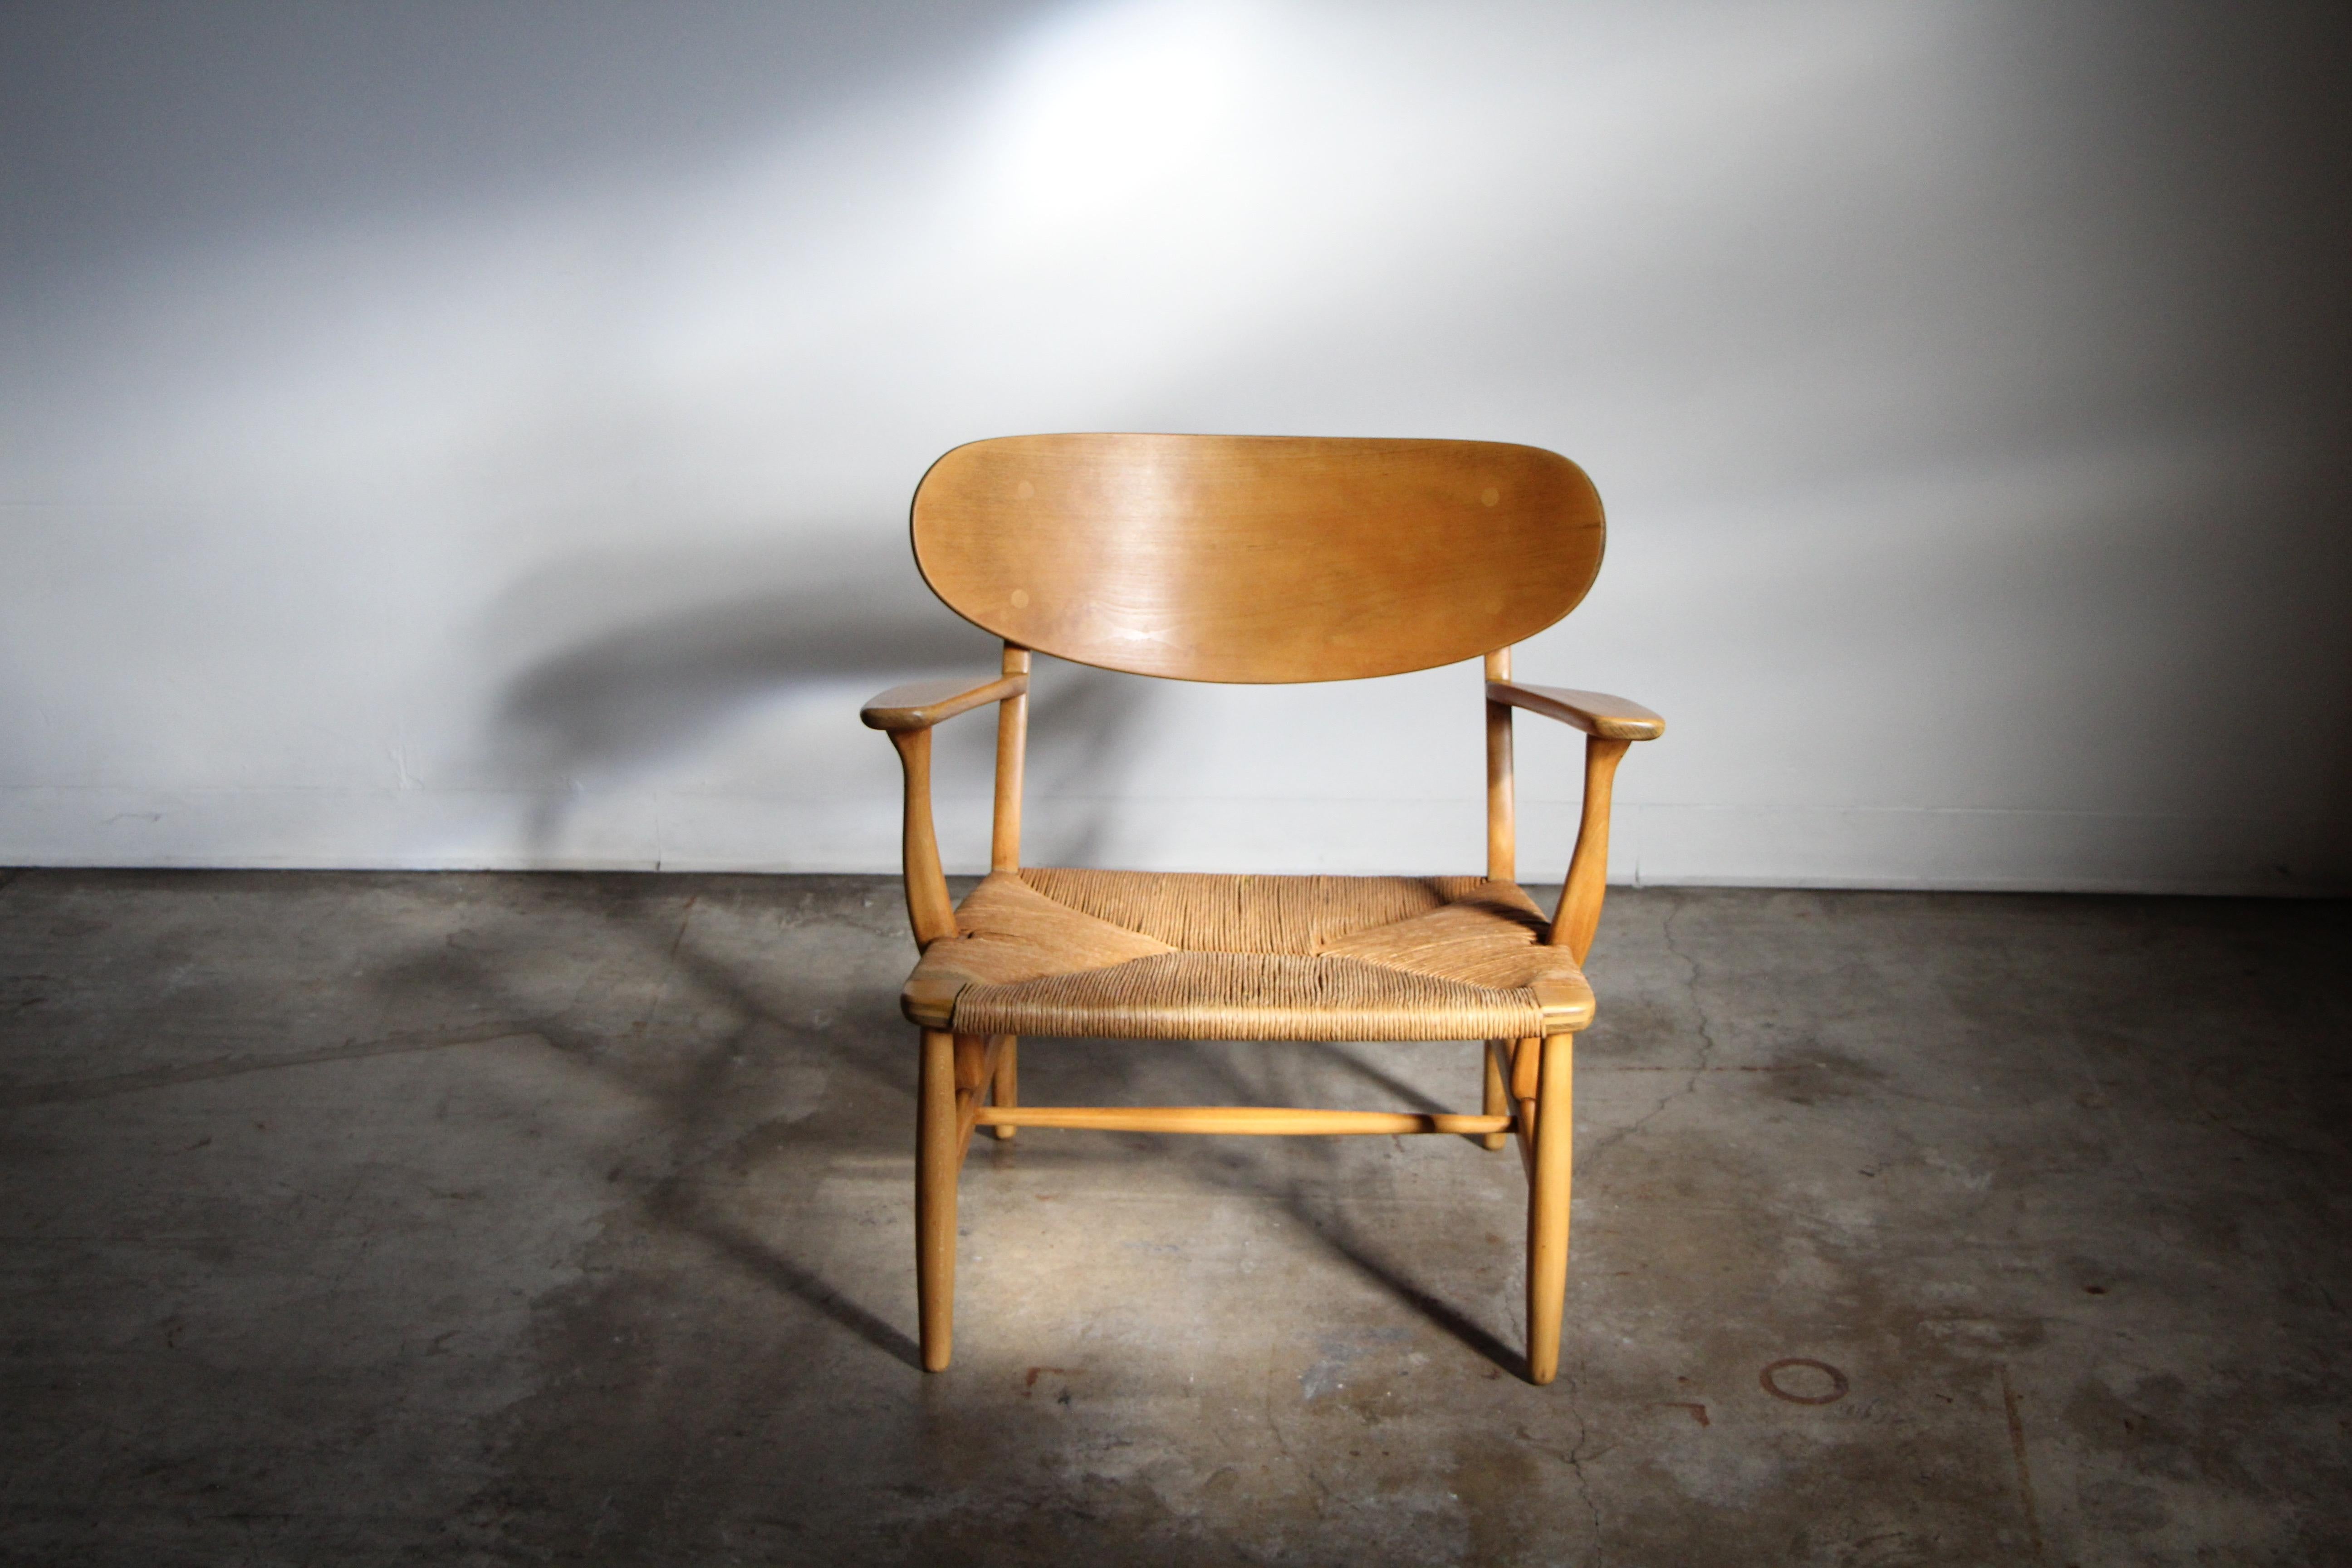 A beautiful and super early example of Hans Wegner's 